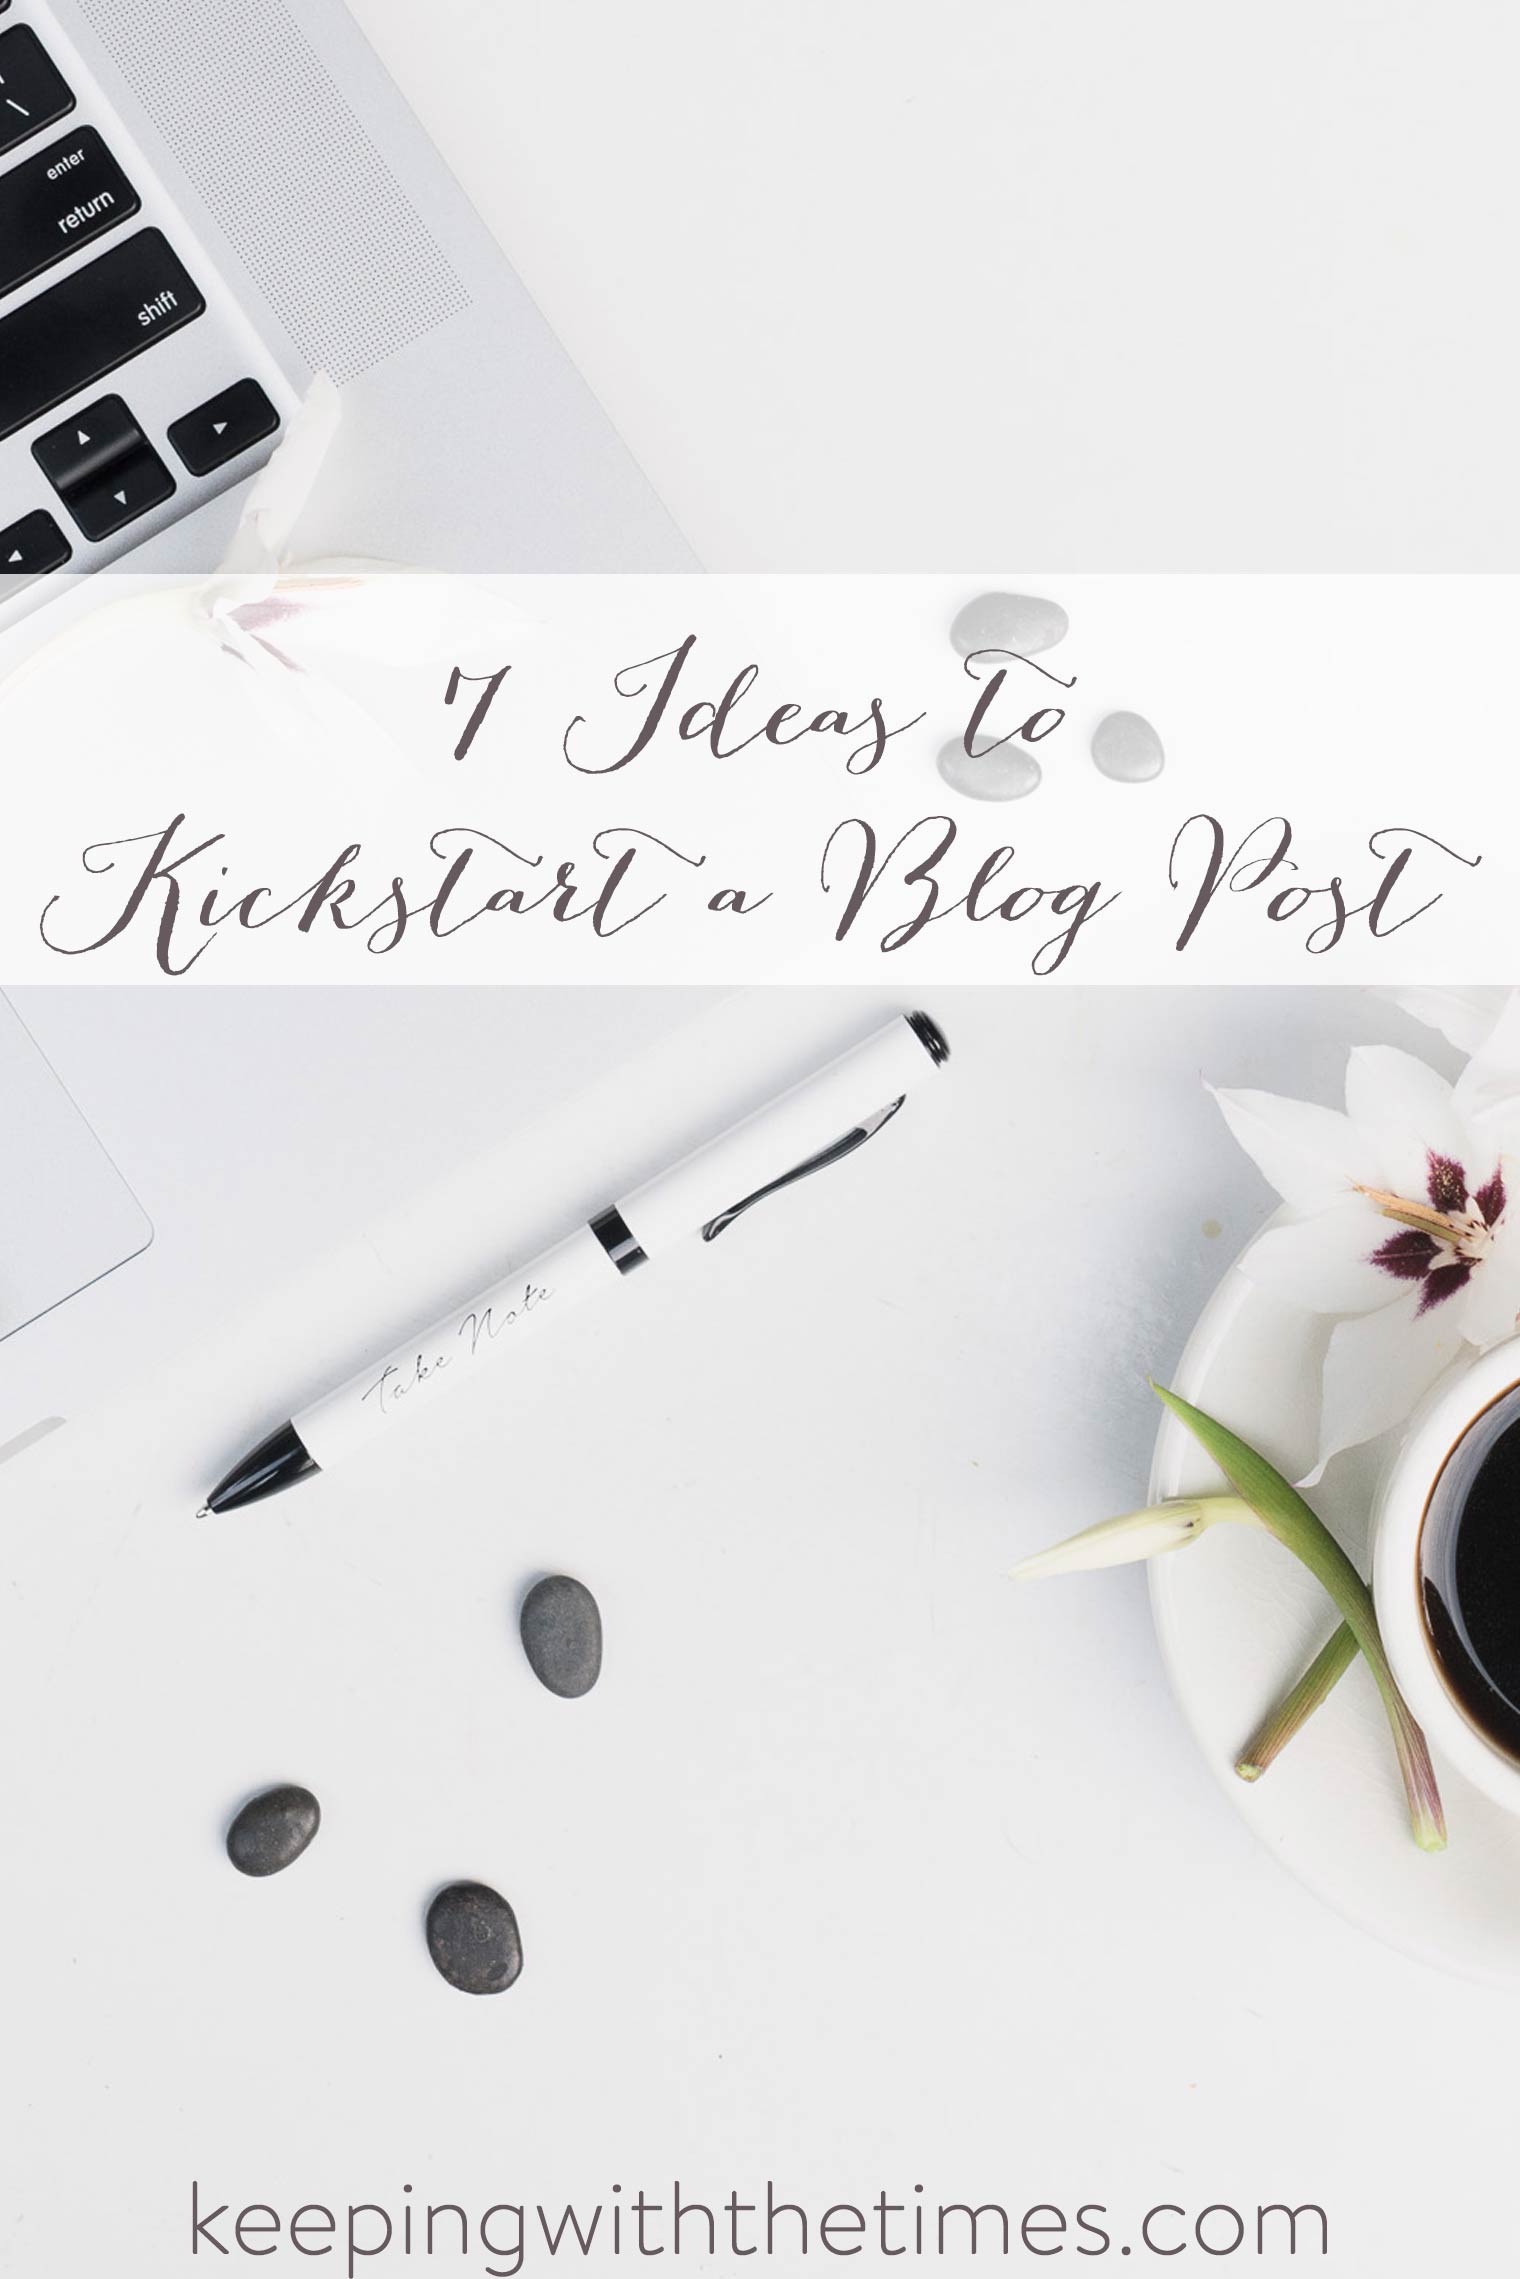 7 Ideas for Kickstarting a Blog Post, Keeping With the Times